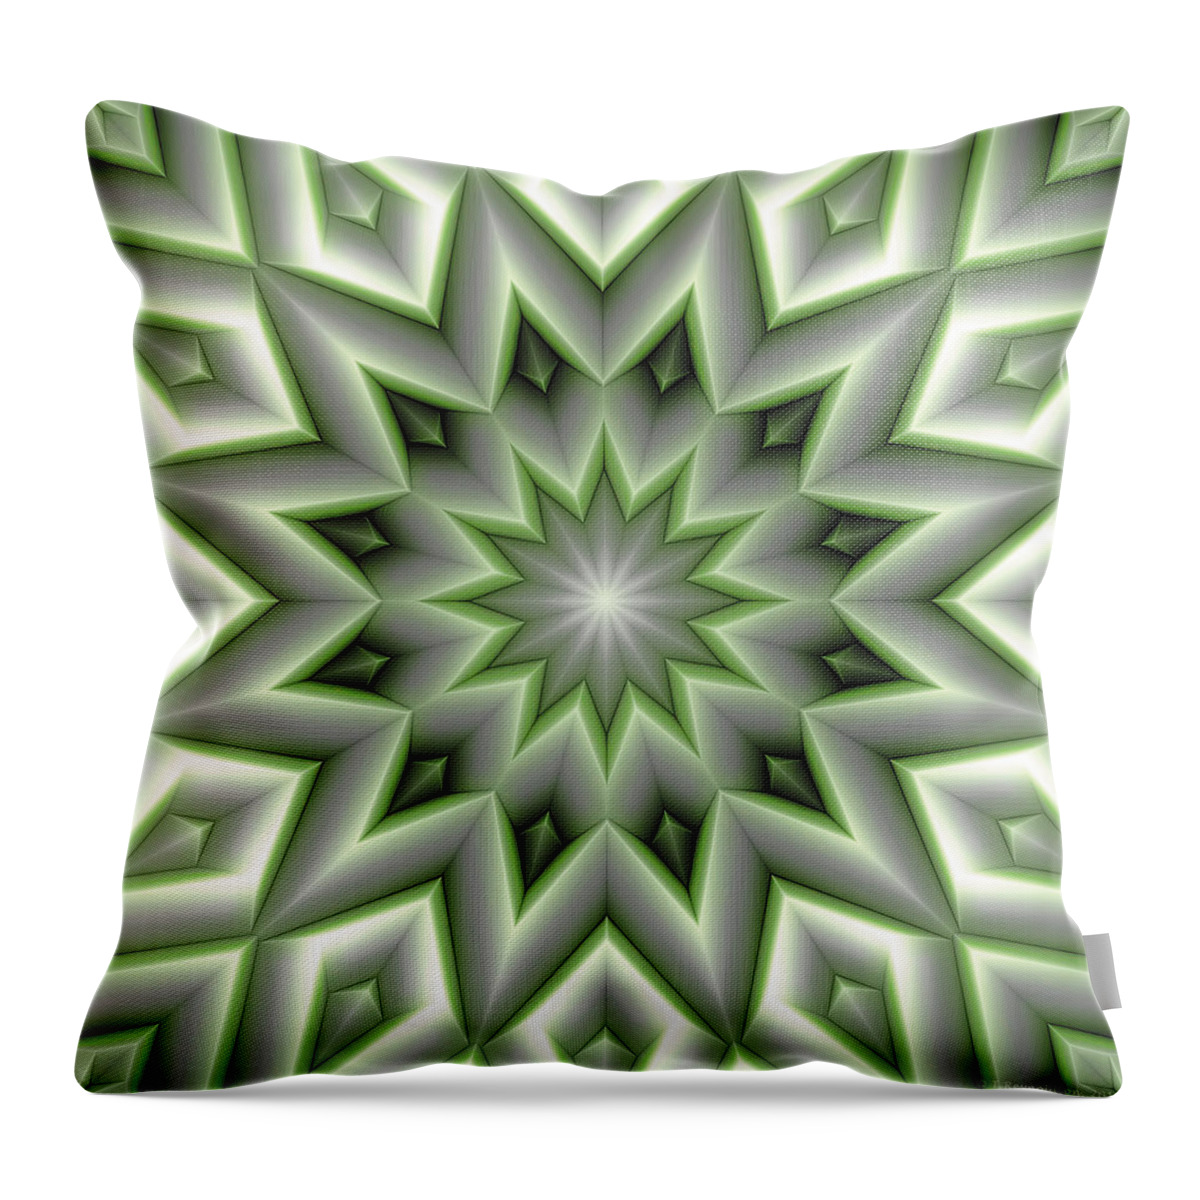 Abstract Throw Pillow featuring the digital art Mandala 107 Green by Terry Reynoldson